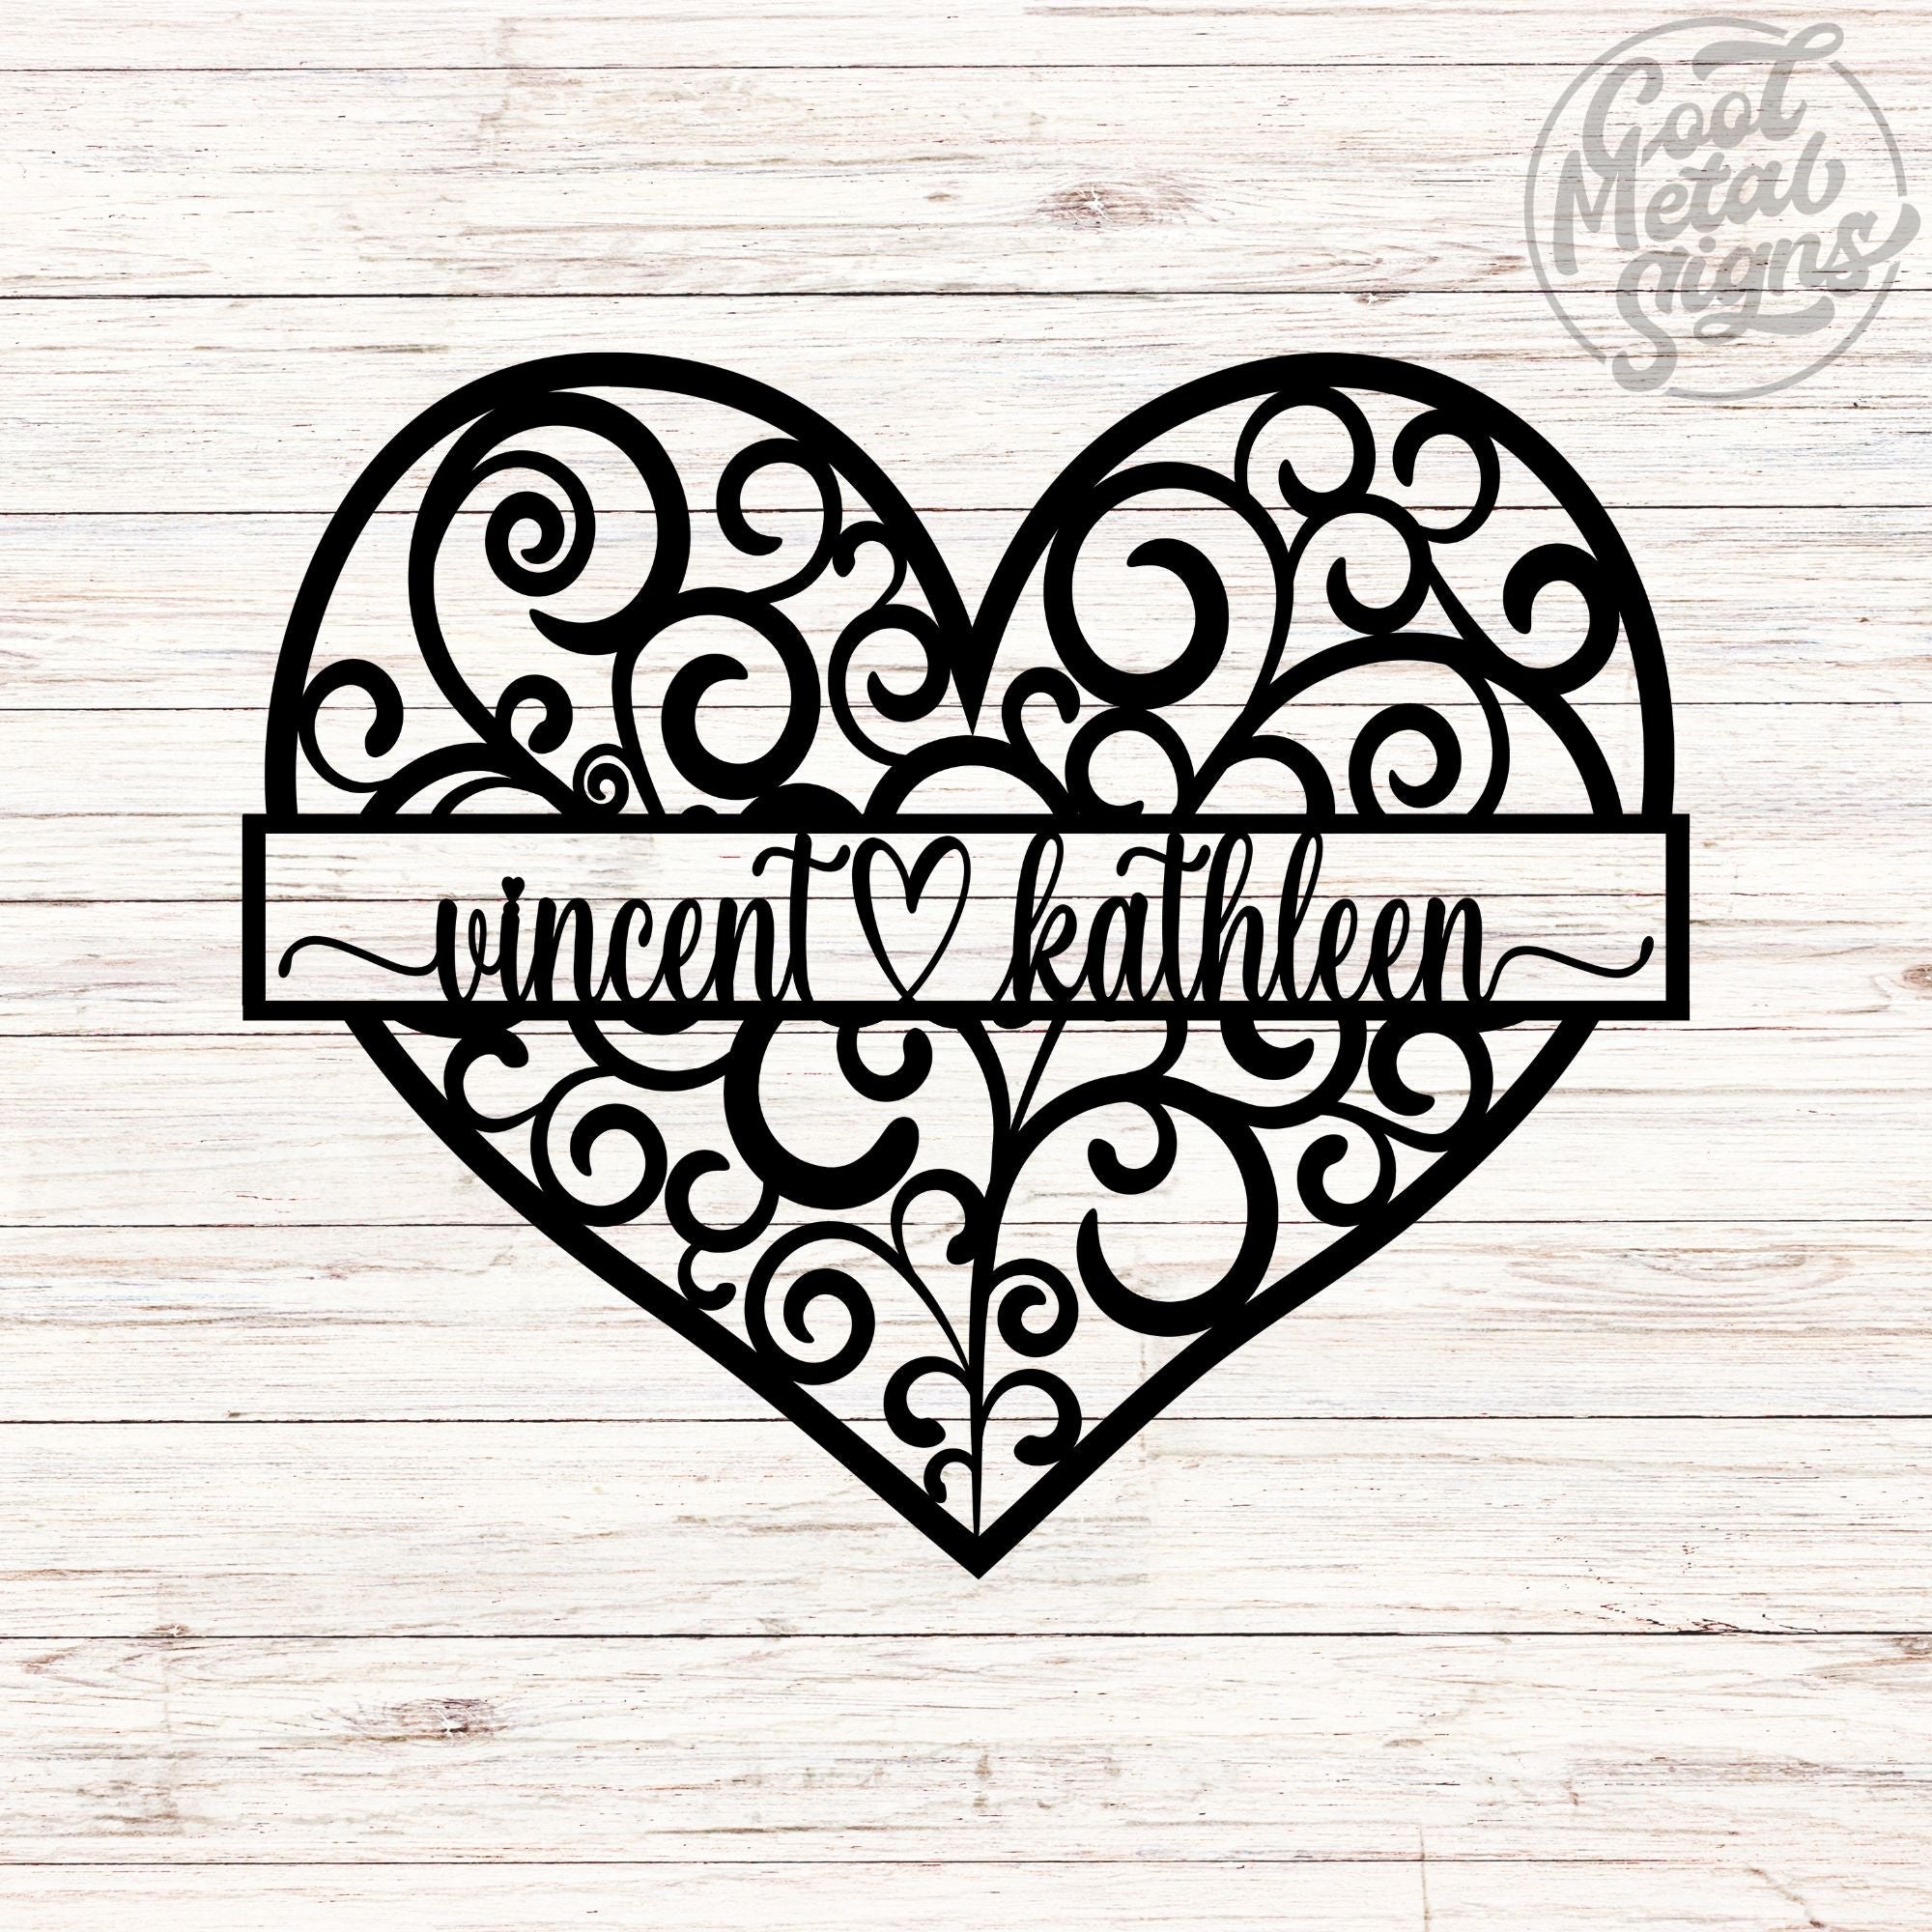 Personalized Swirl Heart Sign - Cool Metal Signs